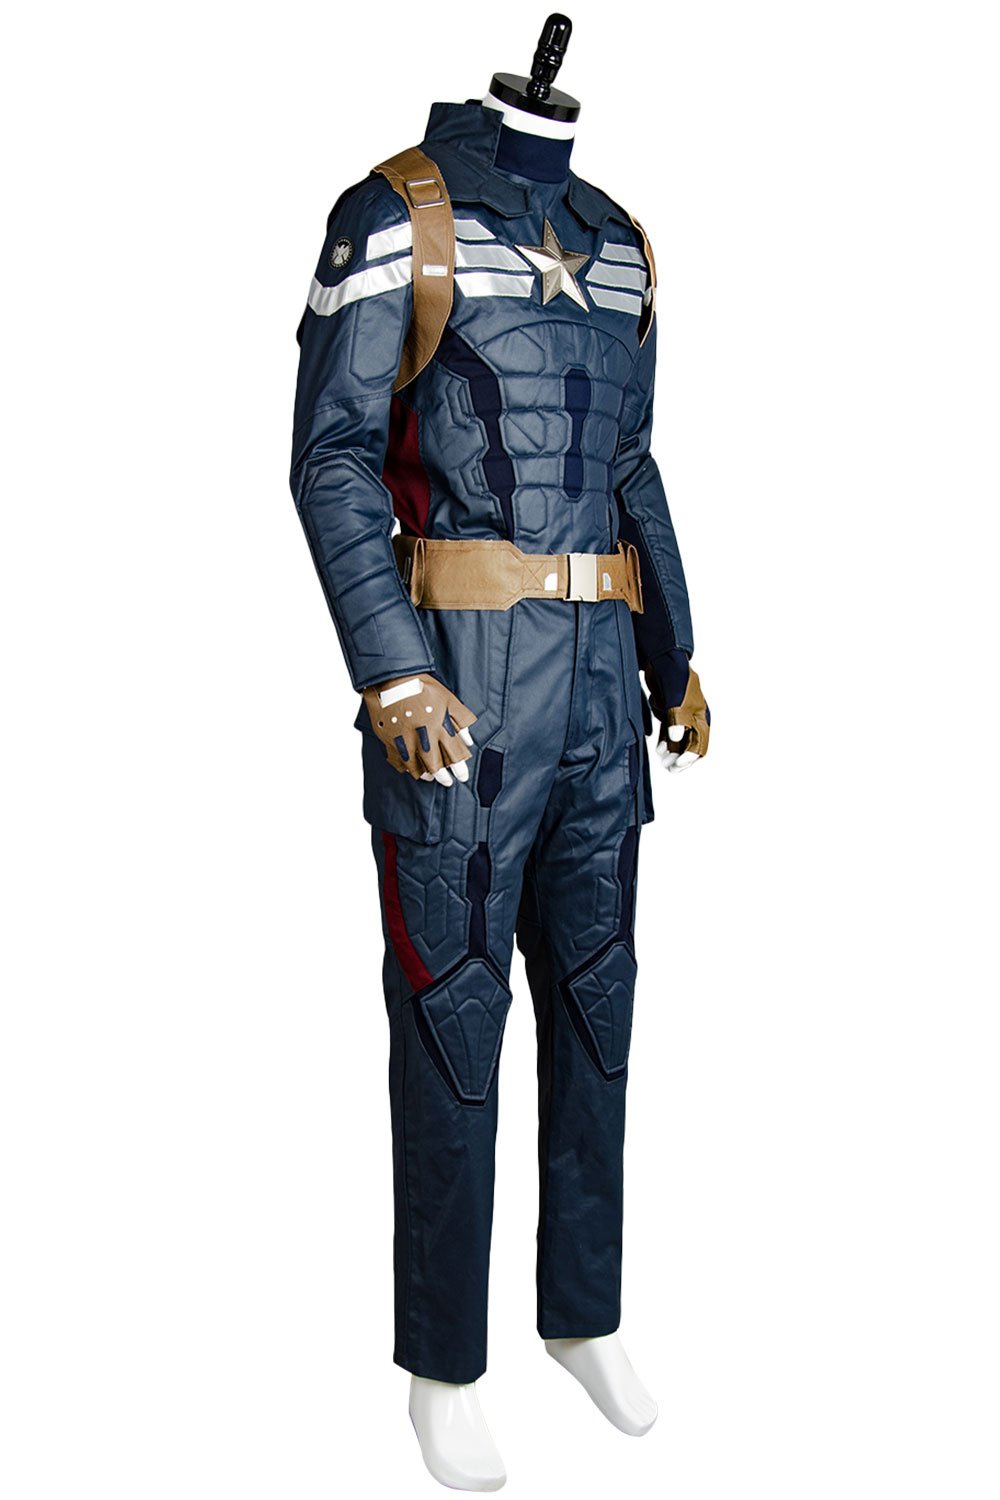 Captain America 2 The Winter Soldier Steve Rogers Uniform Outfit Cosplay Costume